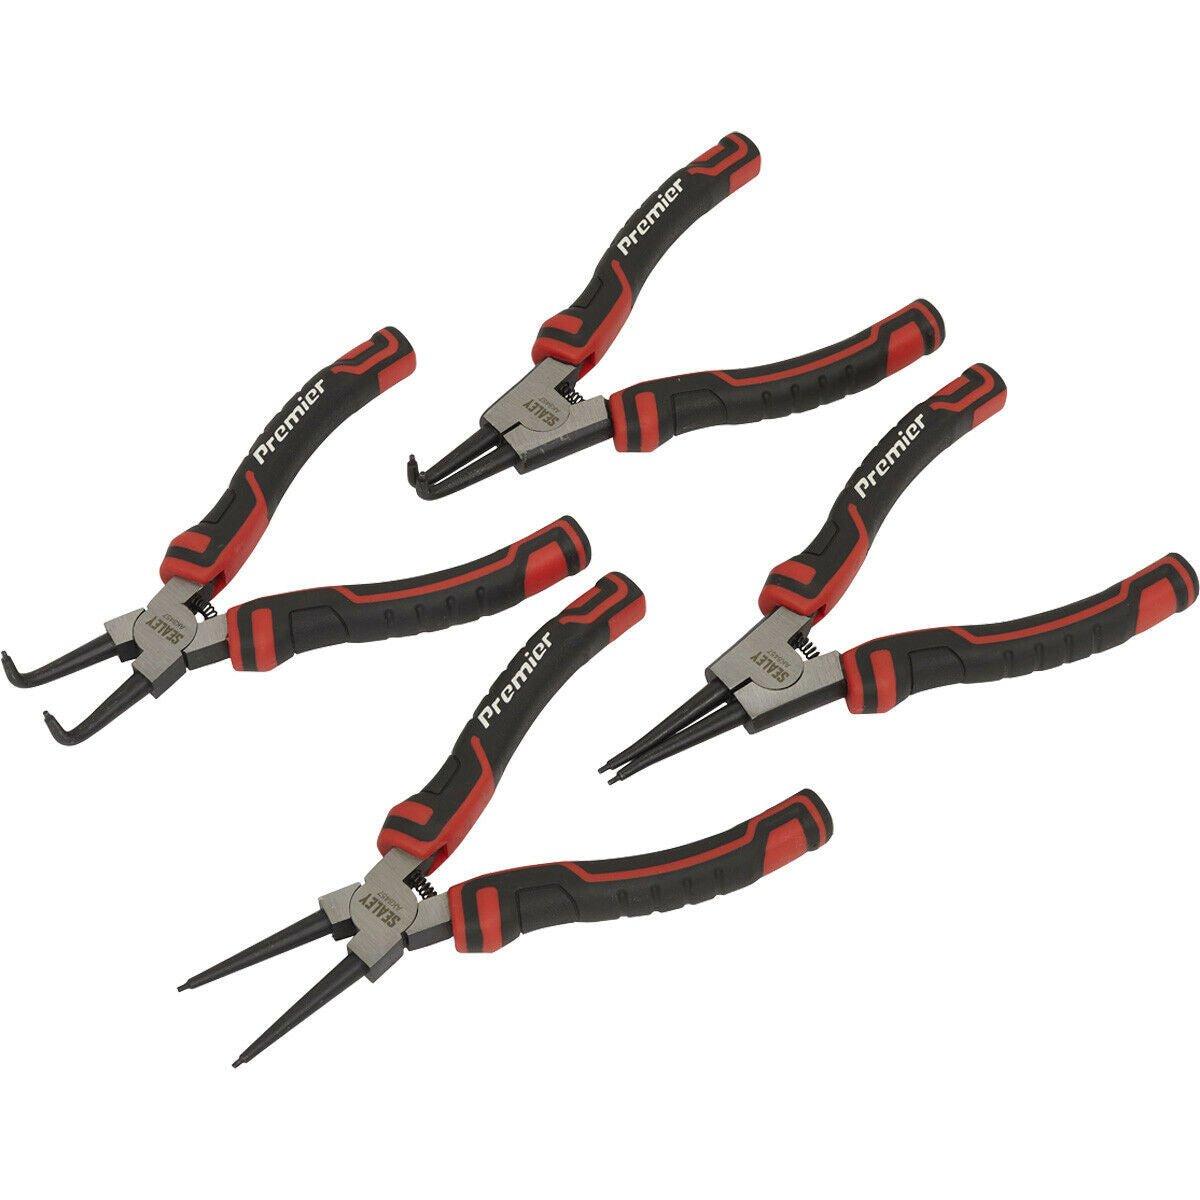 4 Piece 180mm Circlip Pliers Set - Spring Loaded Jaws - Forged  Non-Slip Tips